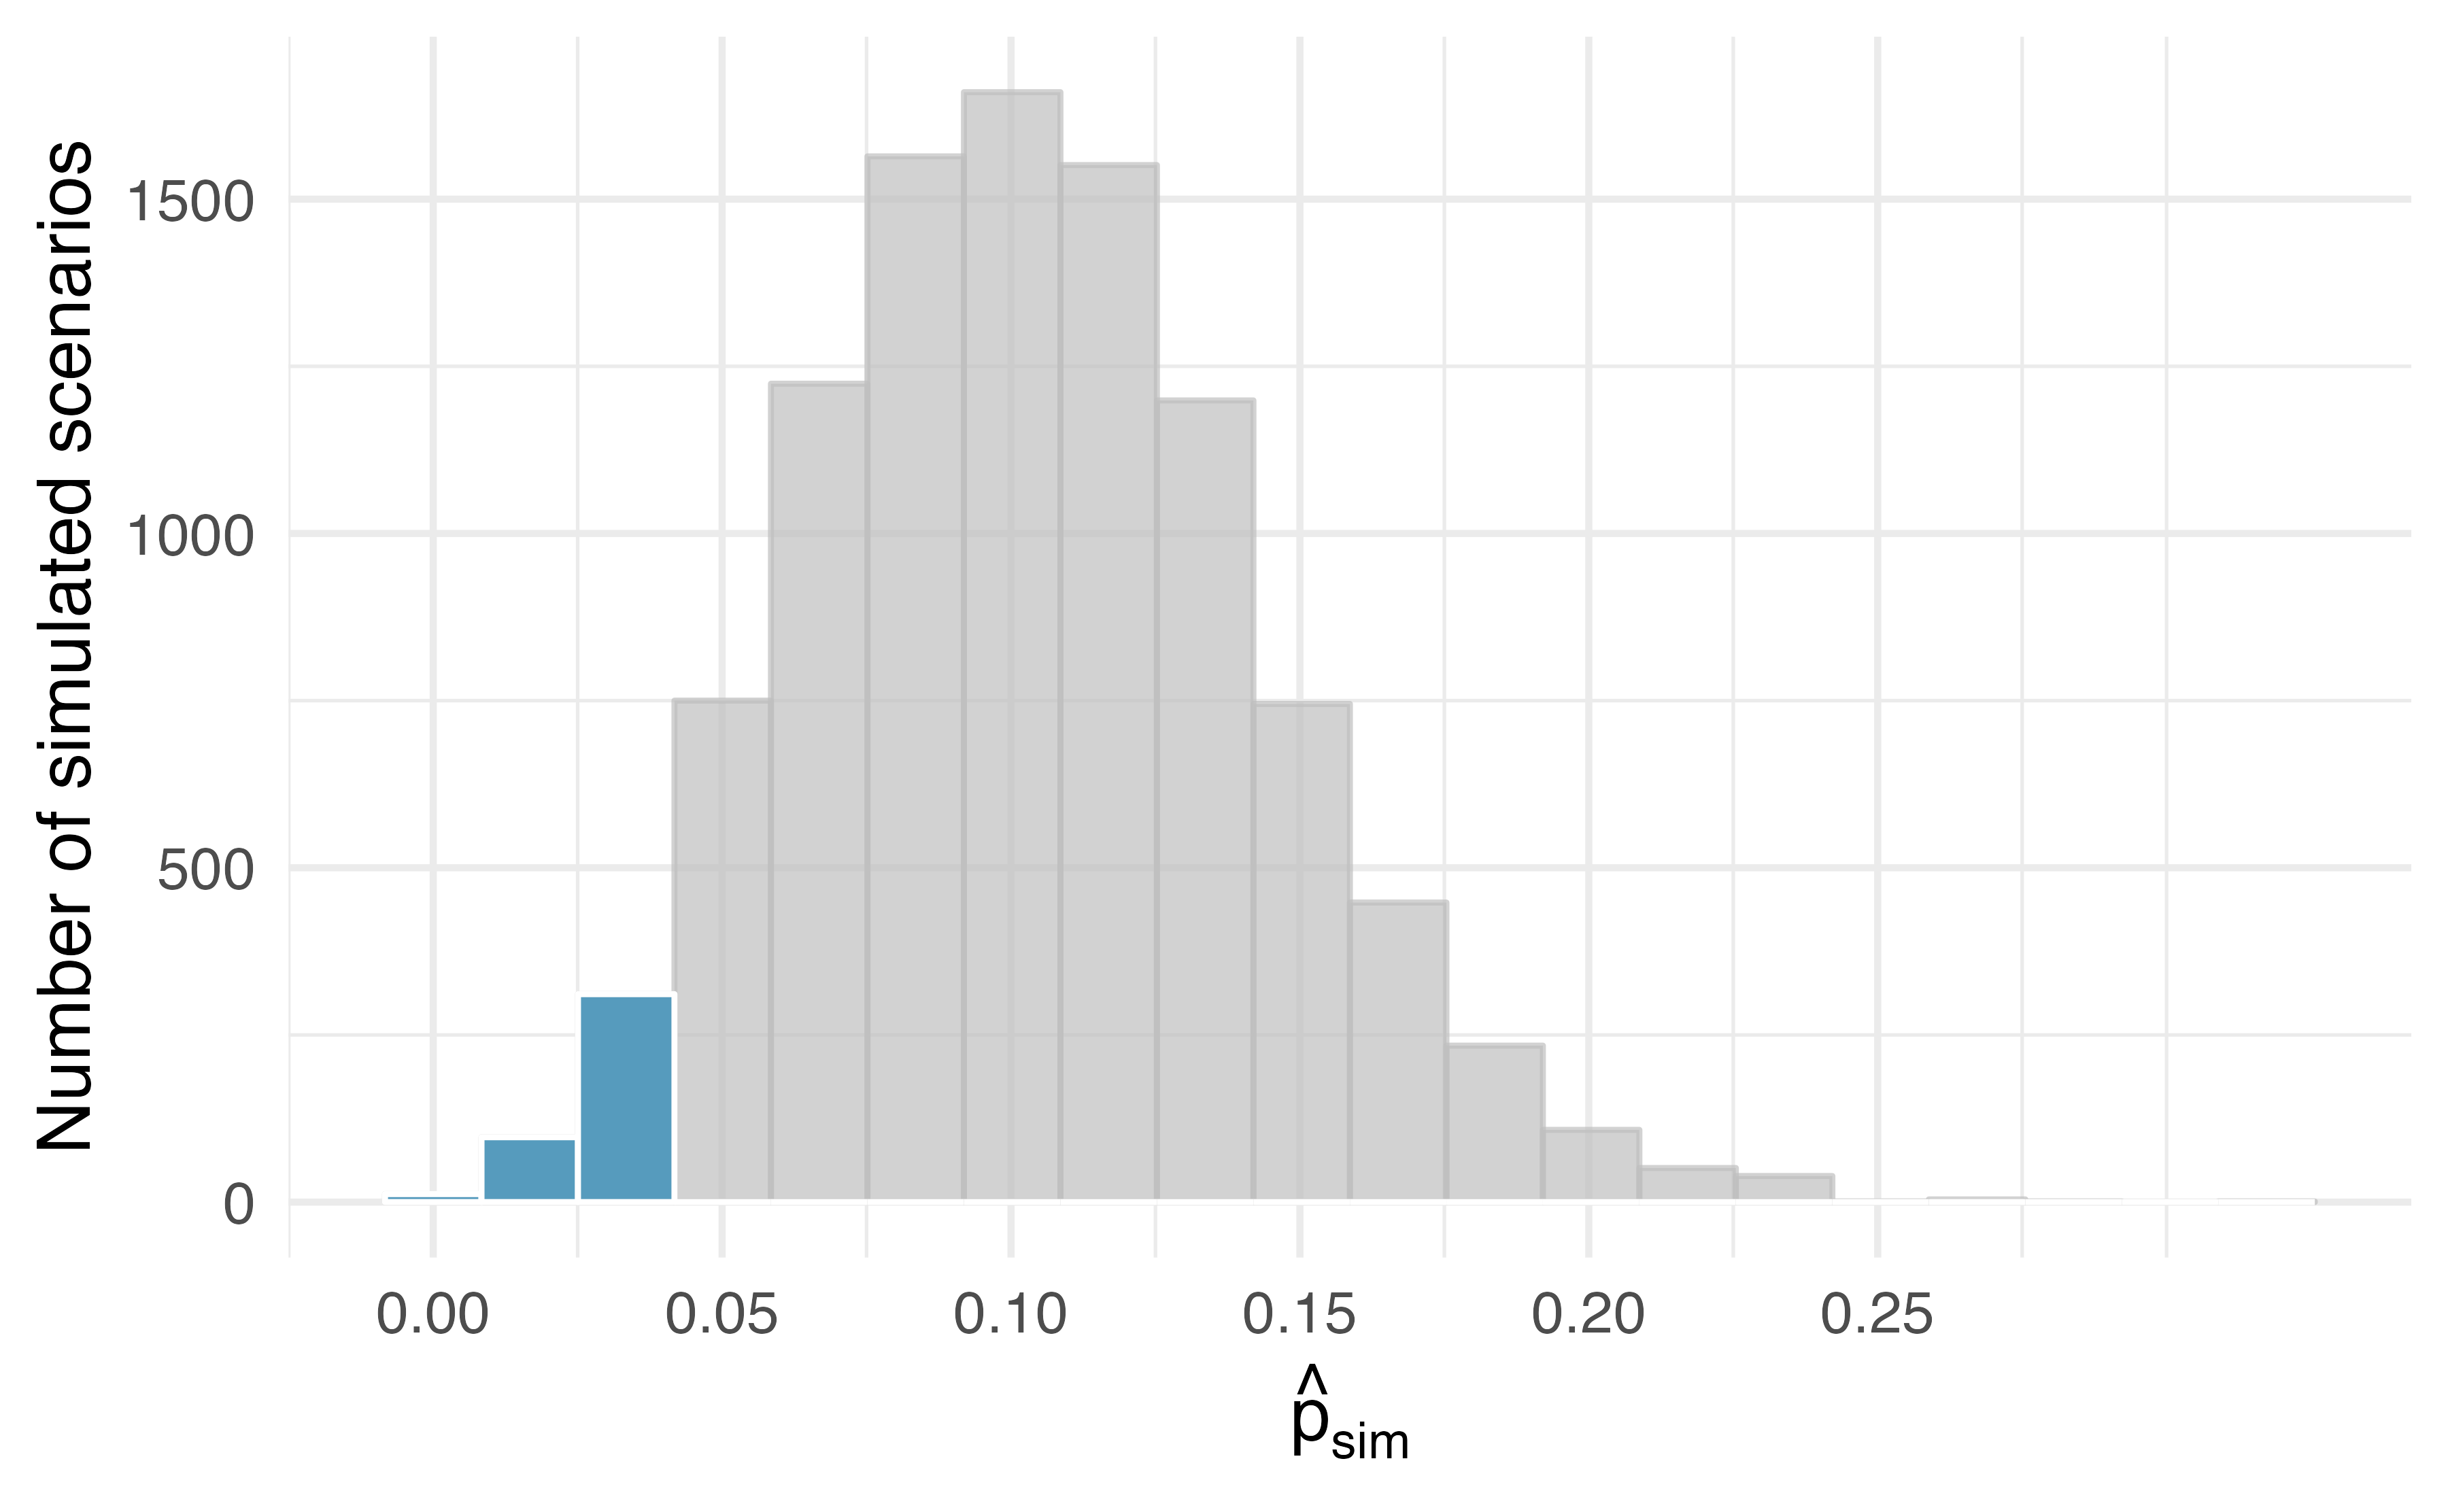 The null distribution for \(\hat{p},\) created from 10,000 simulated studies. The left tail, representing the p-value for the hypothesis test, contains 4.2% of the simulations.